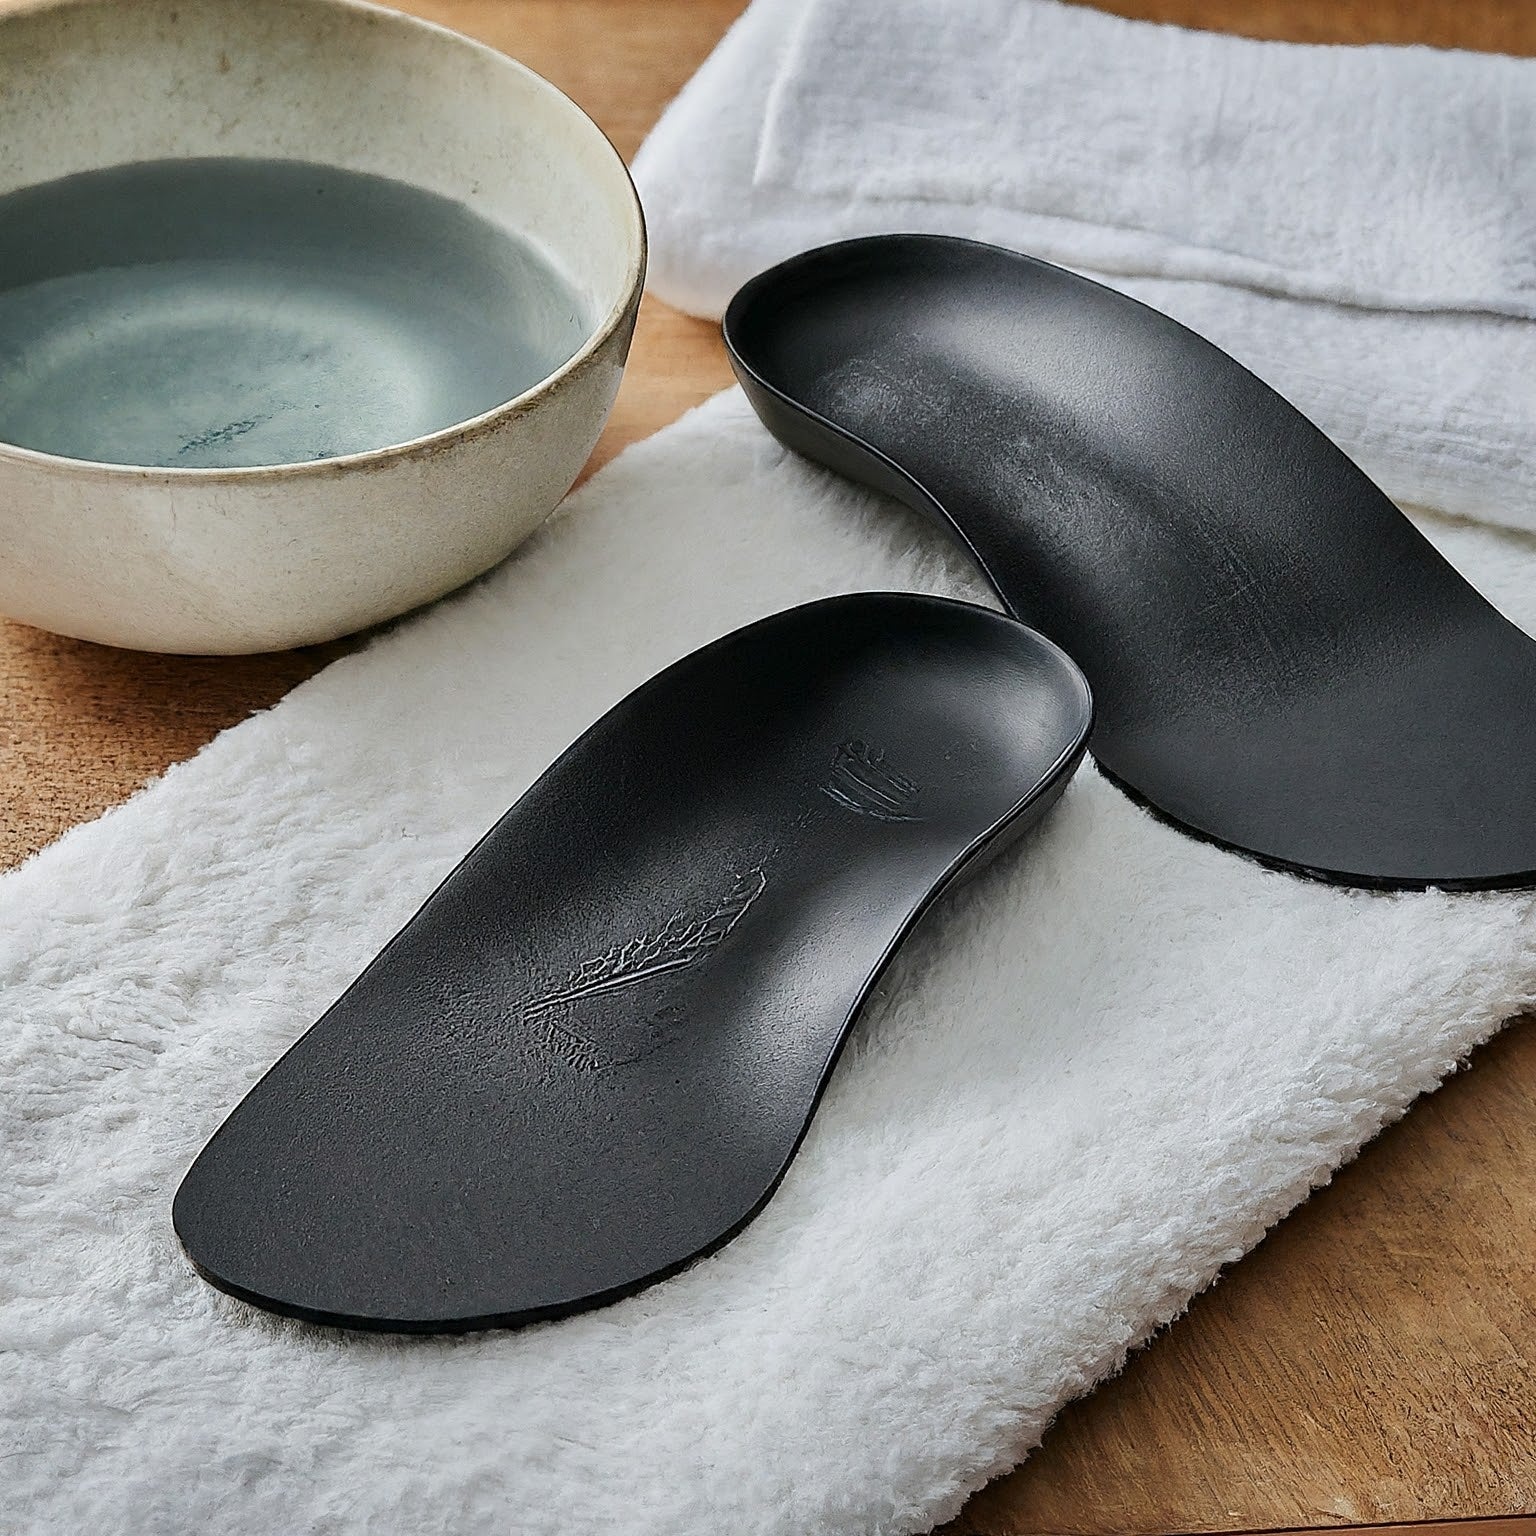 a pair of orthotics laying on a white towel next to a bowl of water